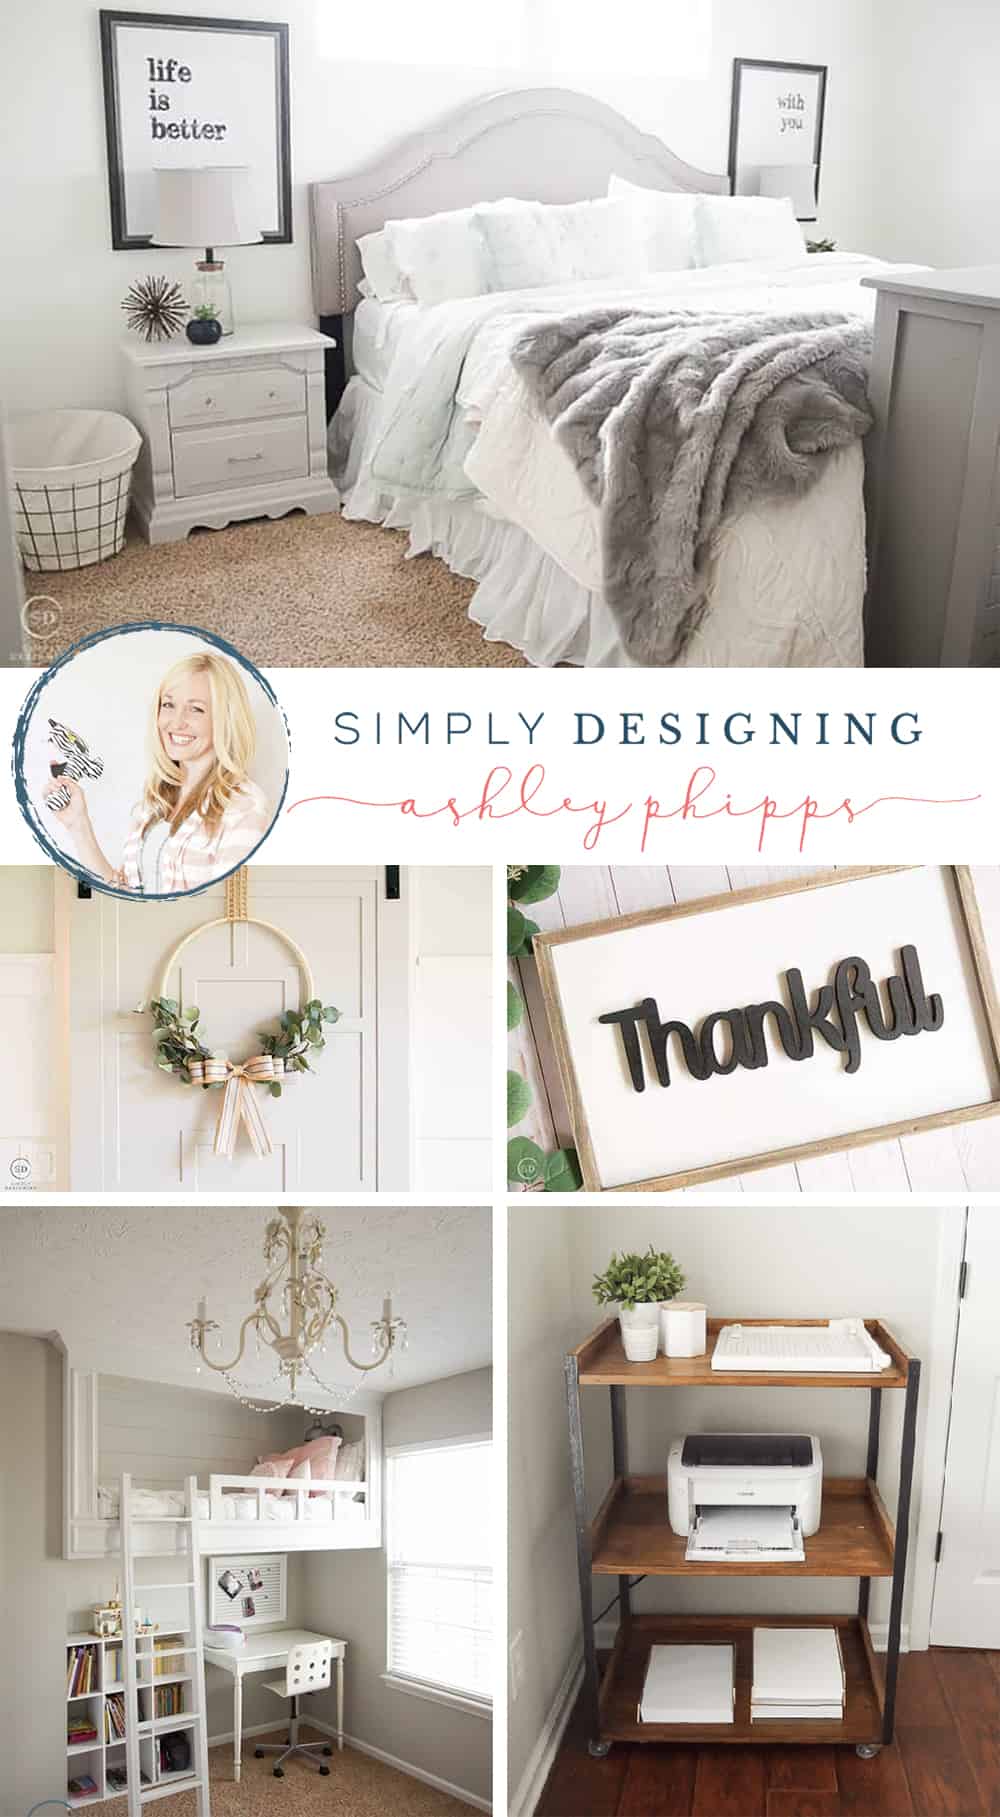 SimplyDesigning AshleyPhipps 45 Light Bright and Beautiful Home Inspiration Ideas 33 Valentine's Day Crafts